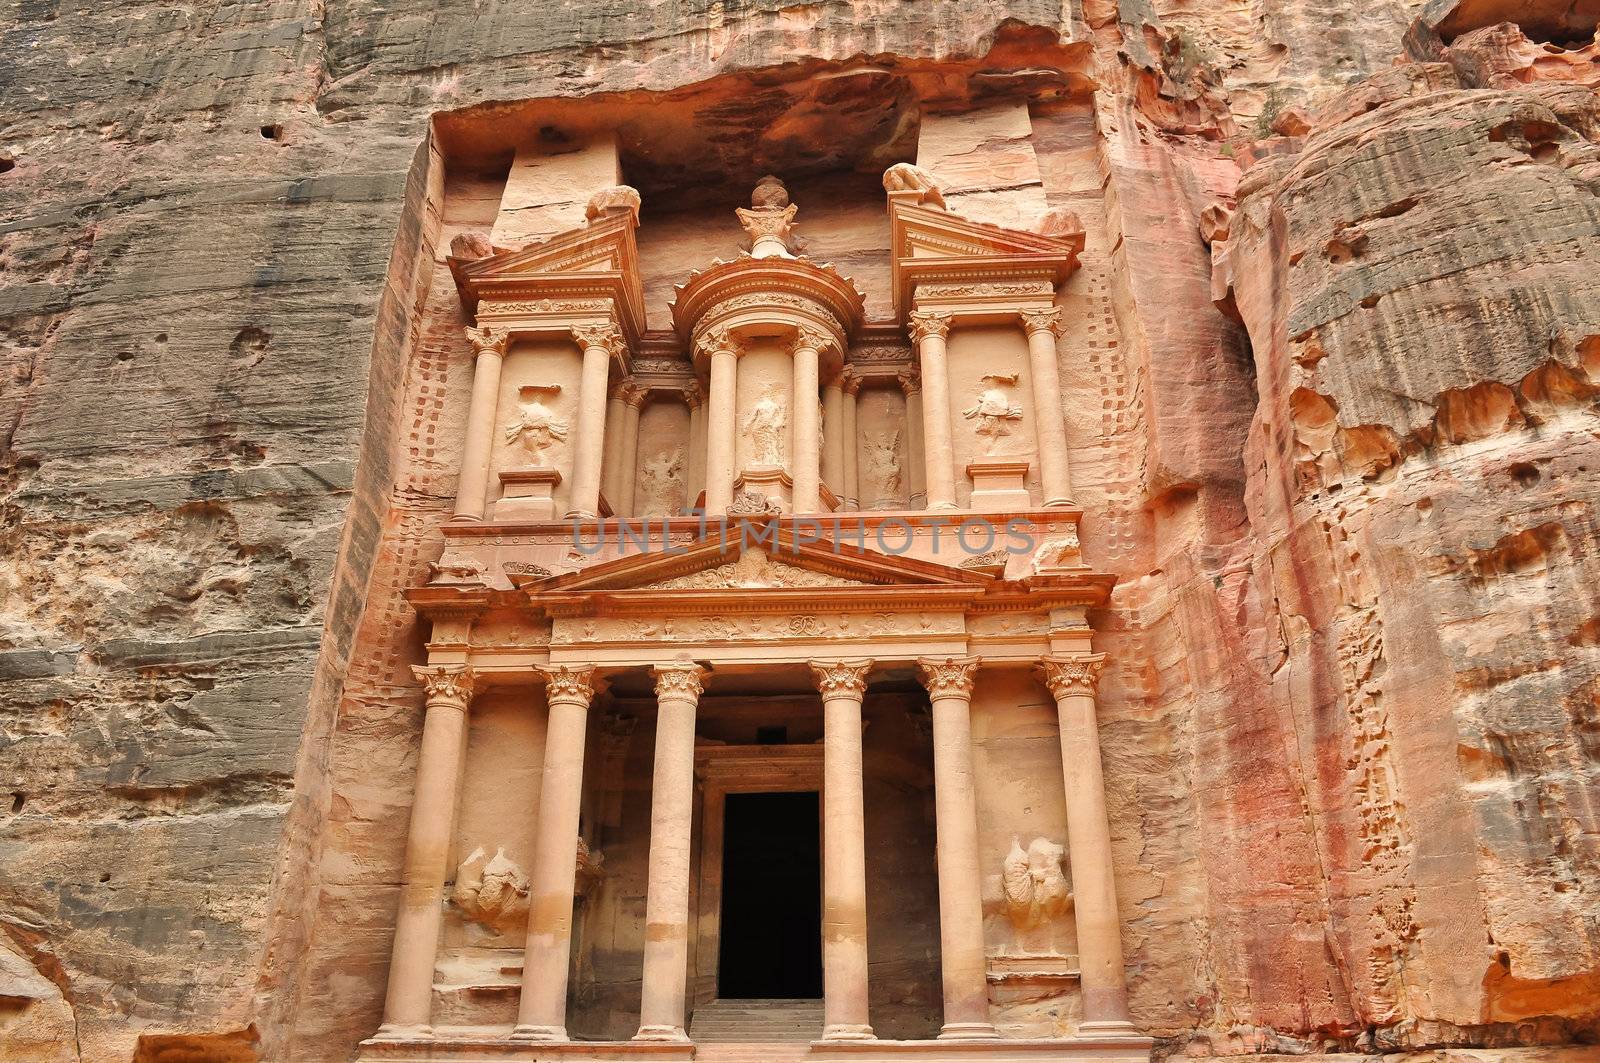 Al Khazneh front view - the treasury of Petra ancient city by martinm303